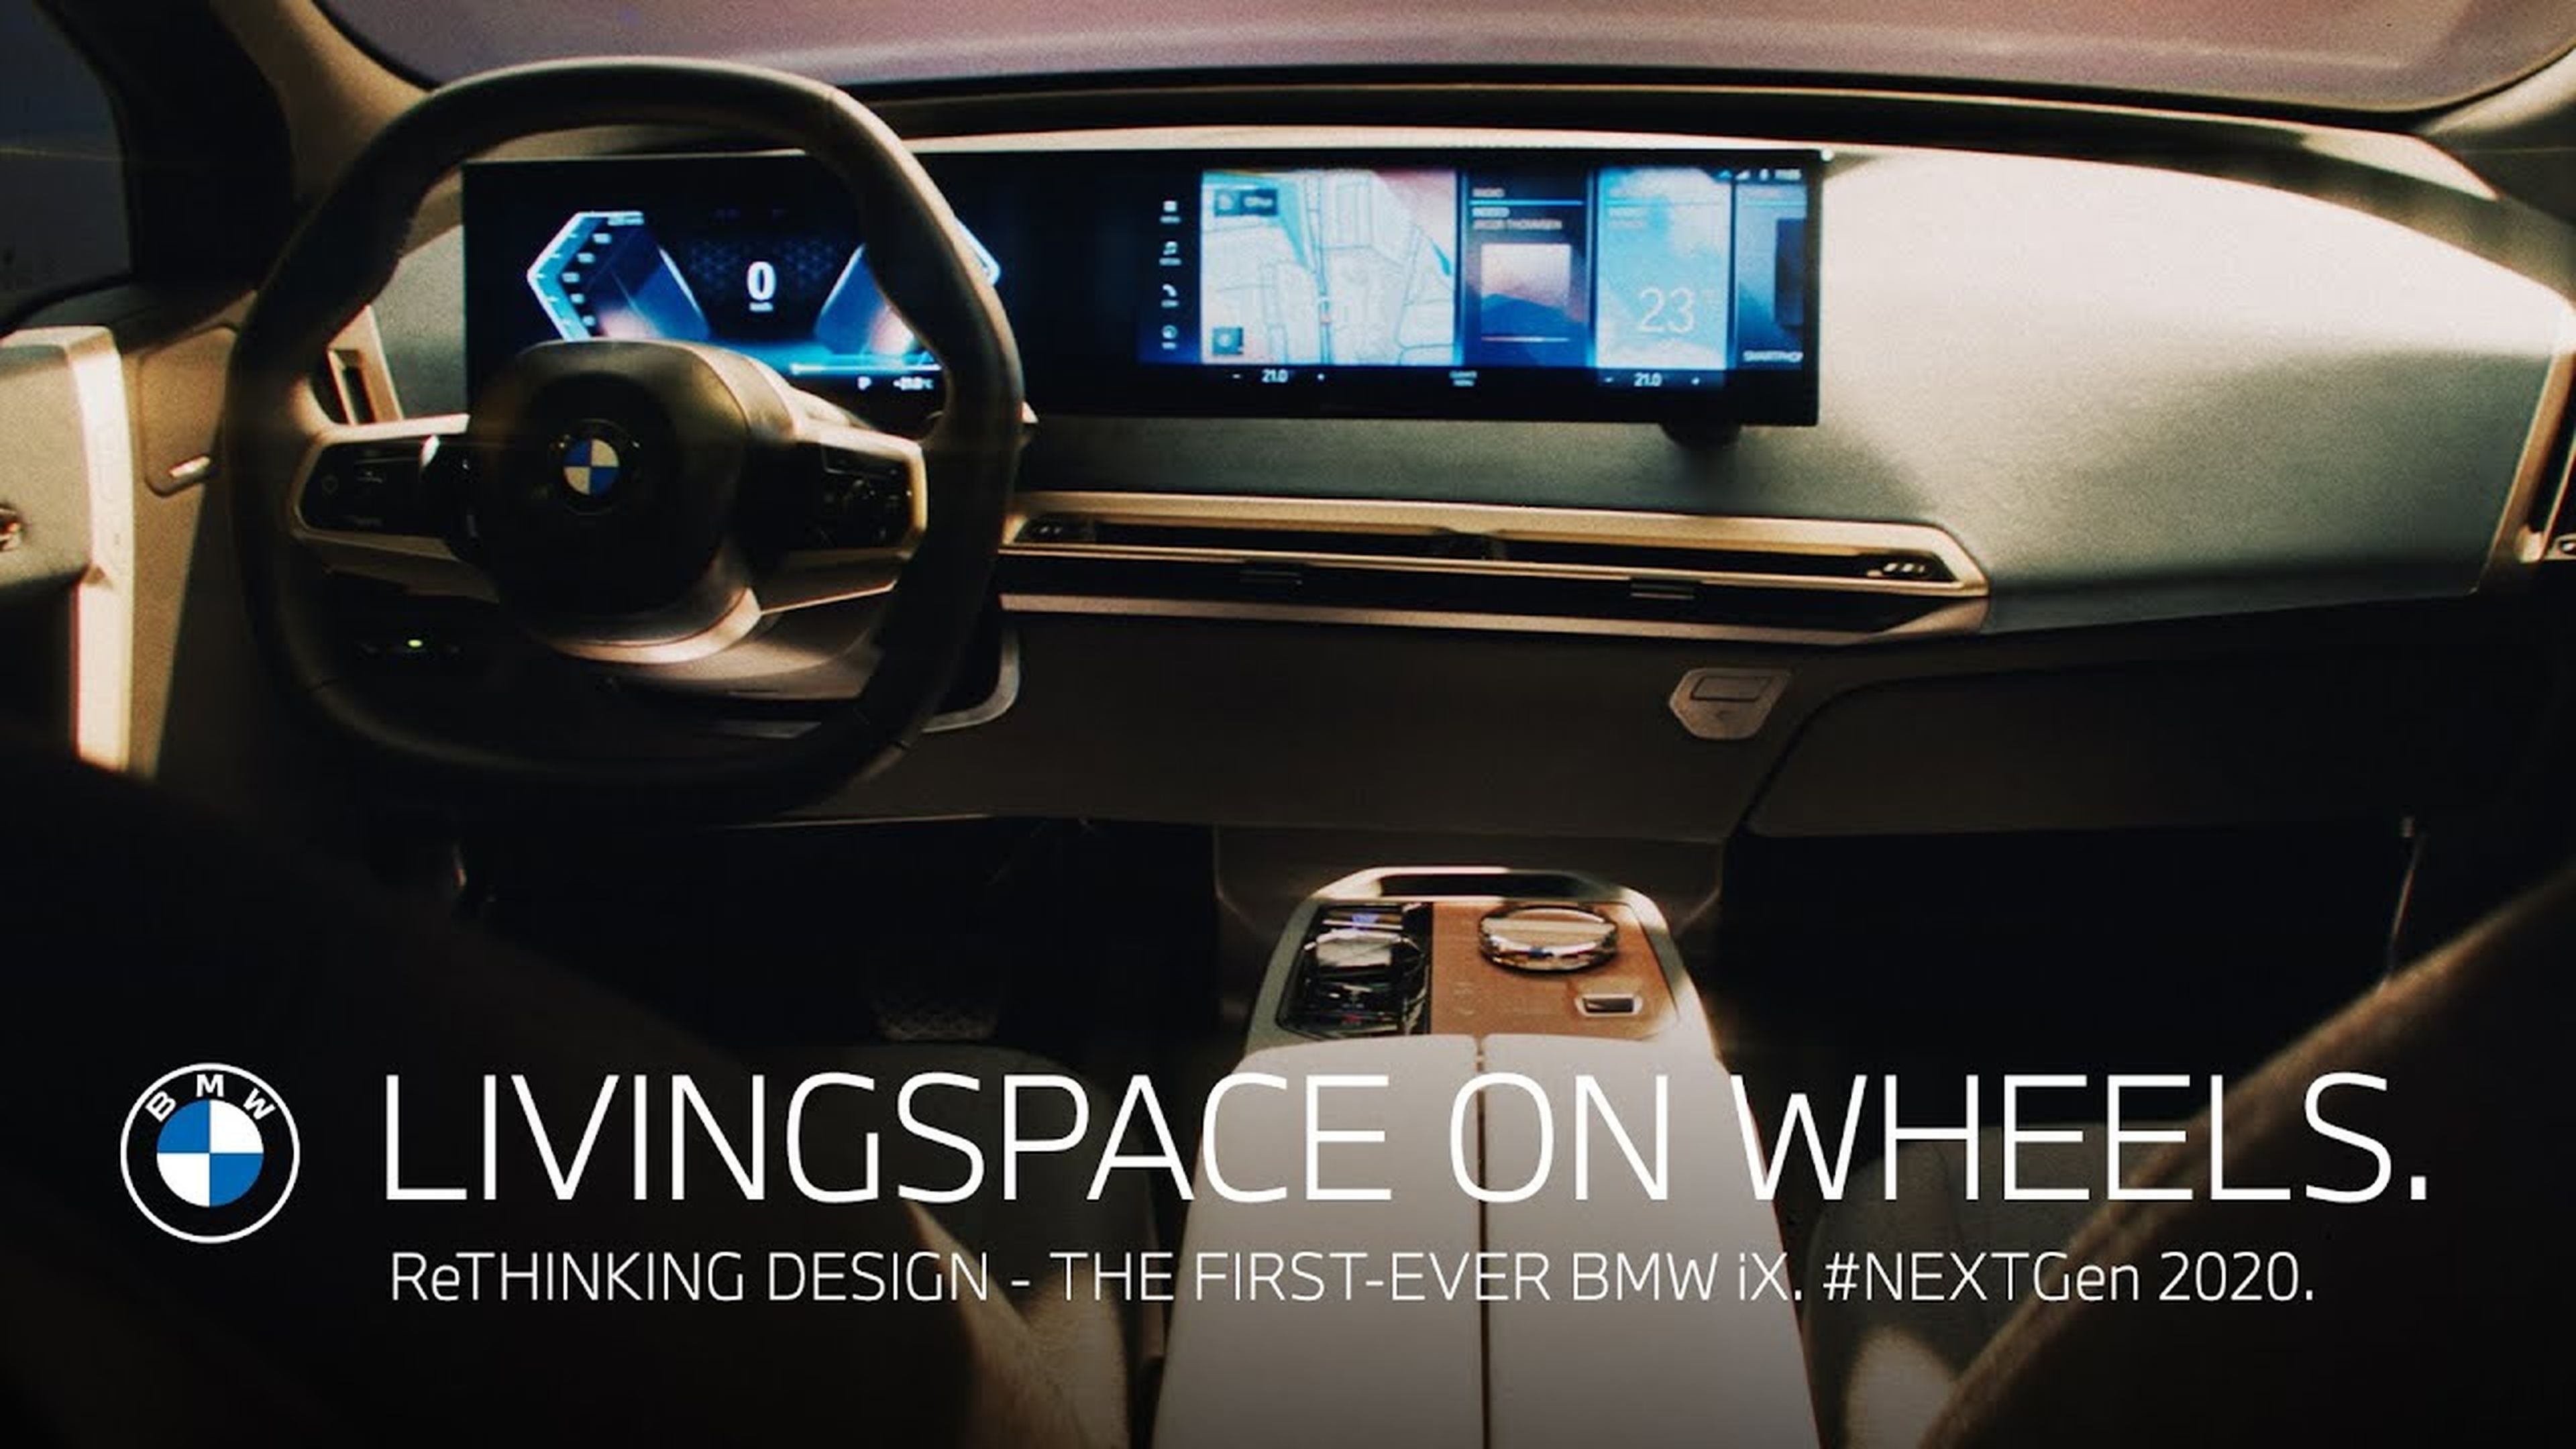 Livingspace on wheels - ReThinking Design. The first-ever BMW iX.